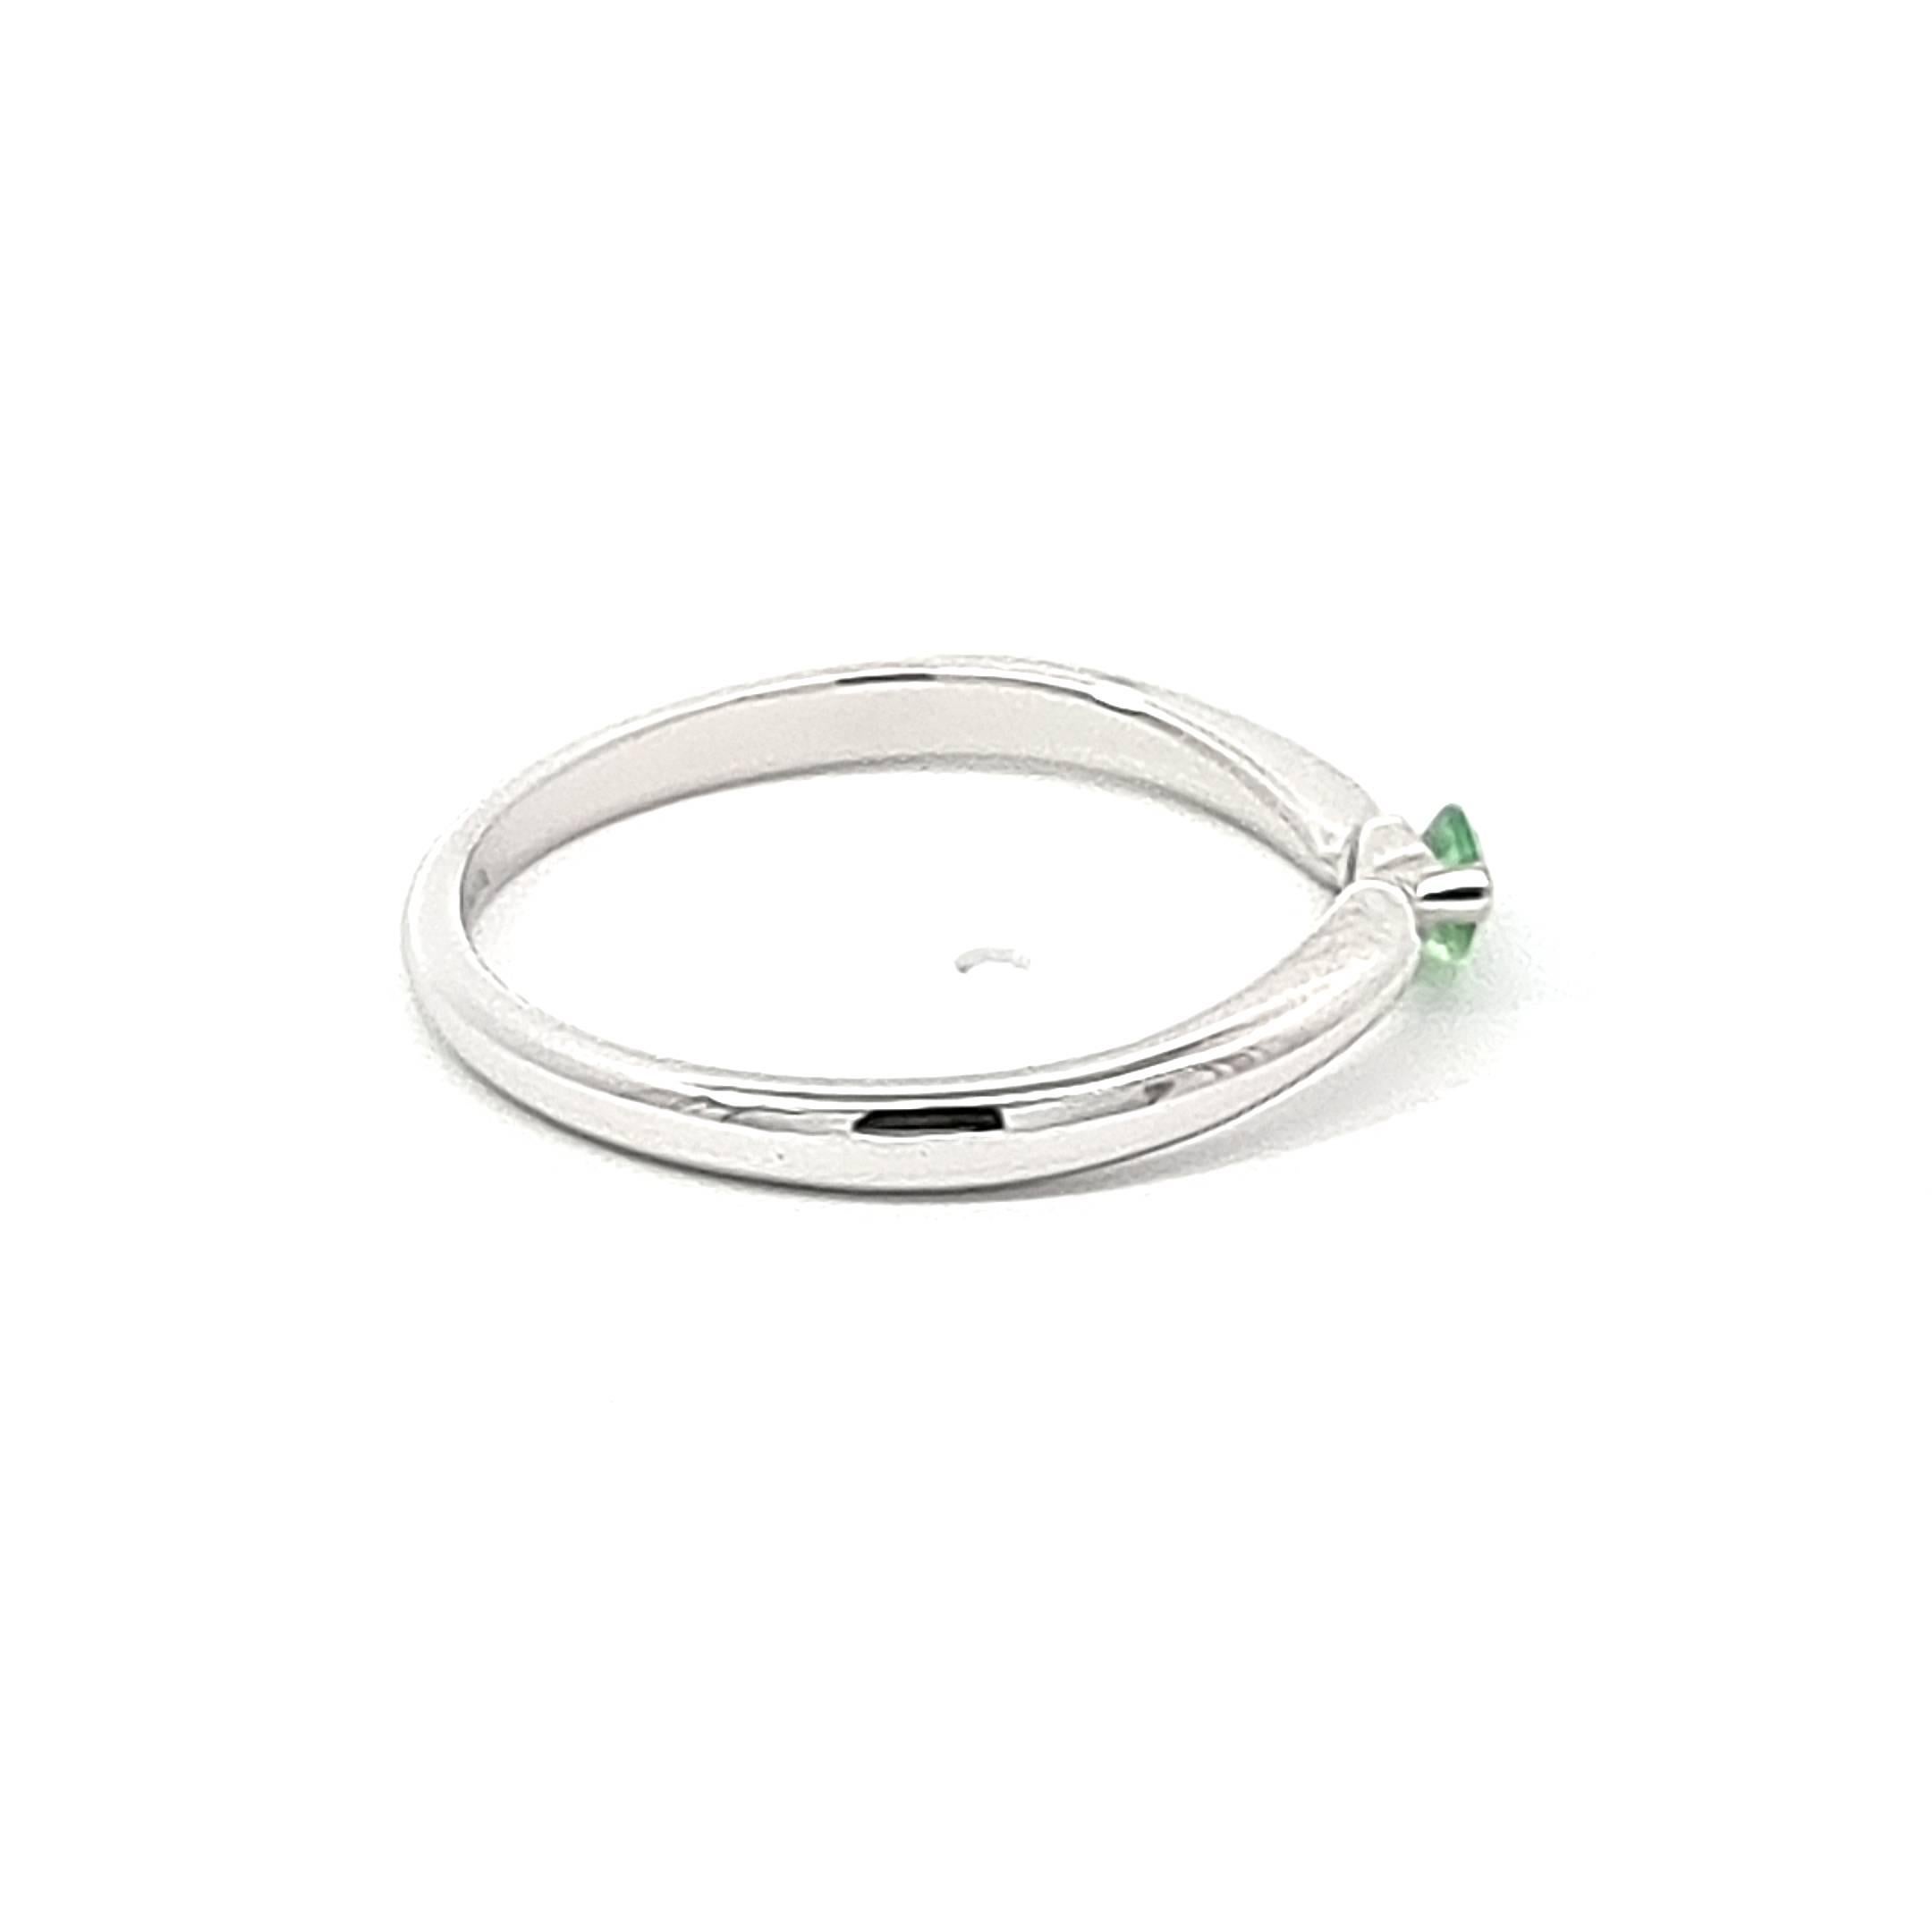 Indulge in the allure of our professionally crafted 14K White Gold Ring, featuring a singular marquise tsavorite garnet, a gemstone that epitomizes understated elegance. The vivid green hue of the tsavorite, weighing 0.22, steals the spotlight,